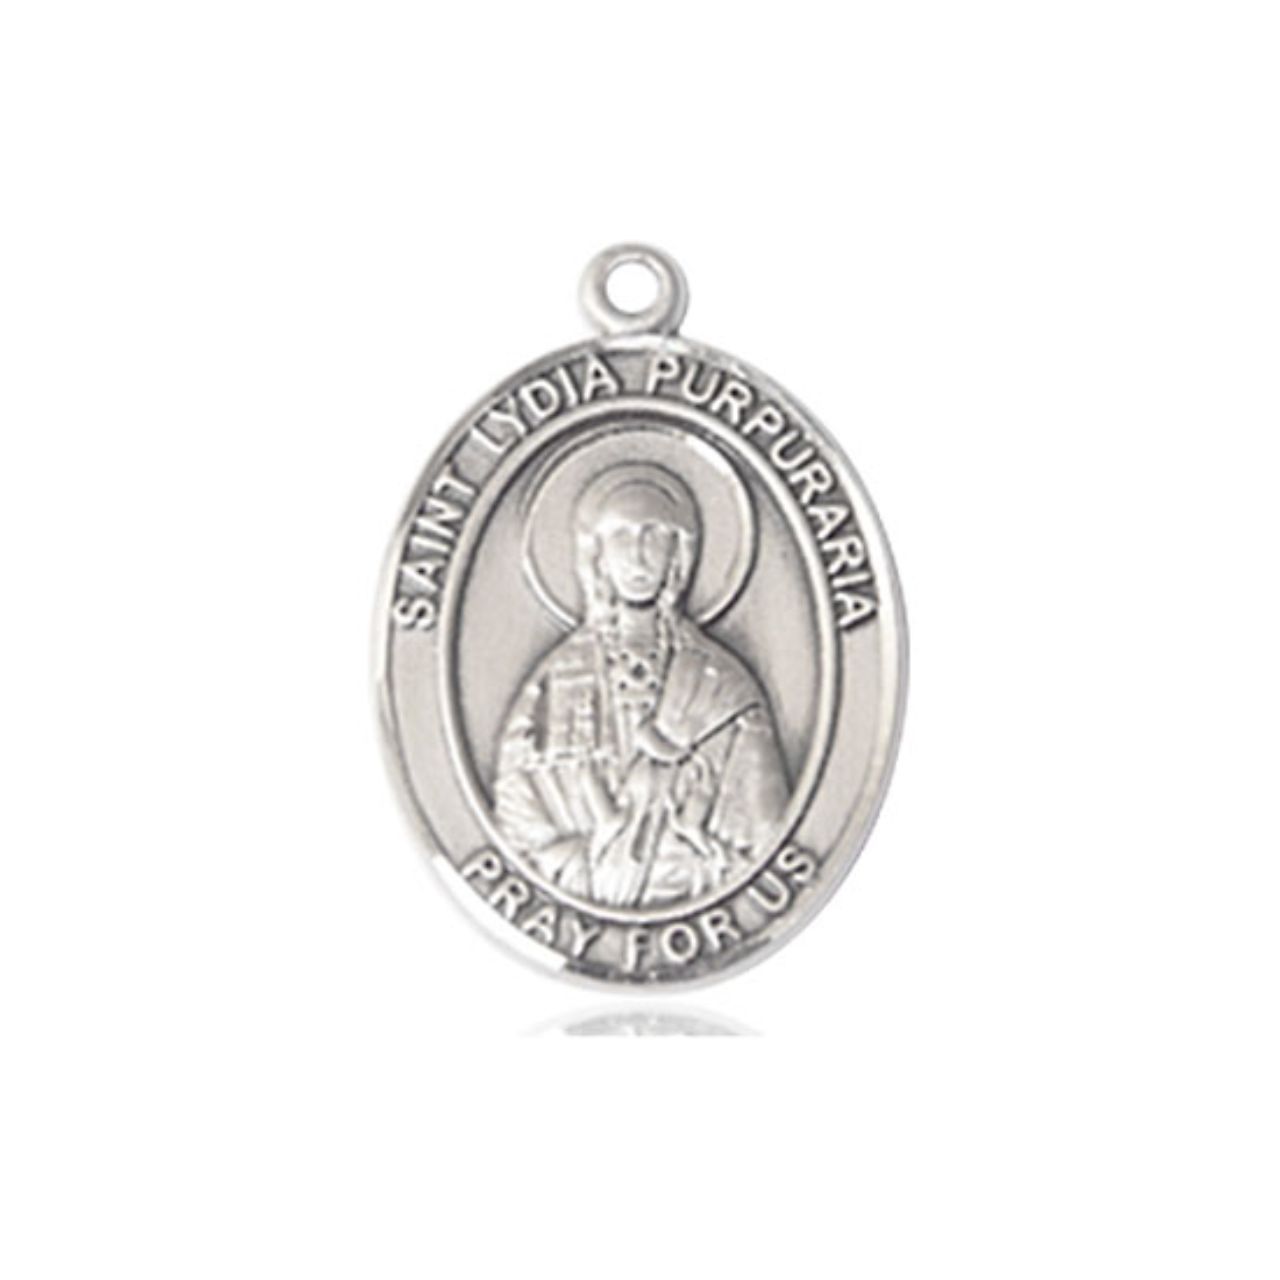 St. Lydia Purpuraria Medal - Sterling Silver Oval Pendant (3 Sizes)